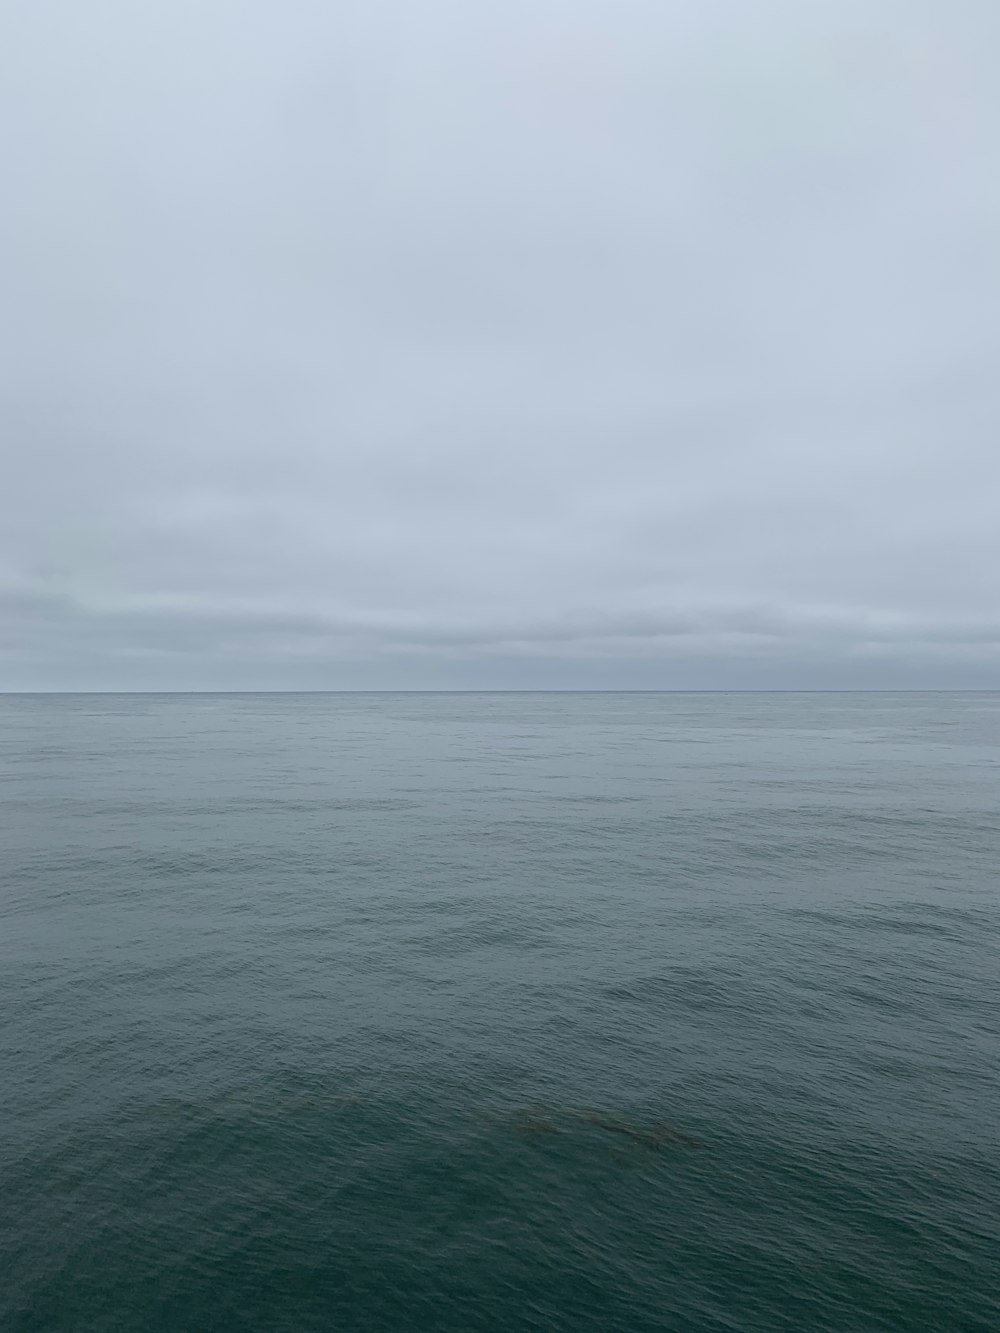 body of water under cloudy sky during daytime